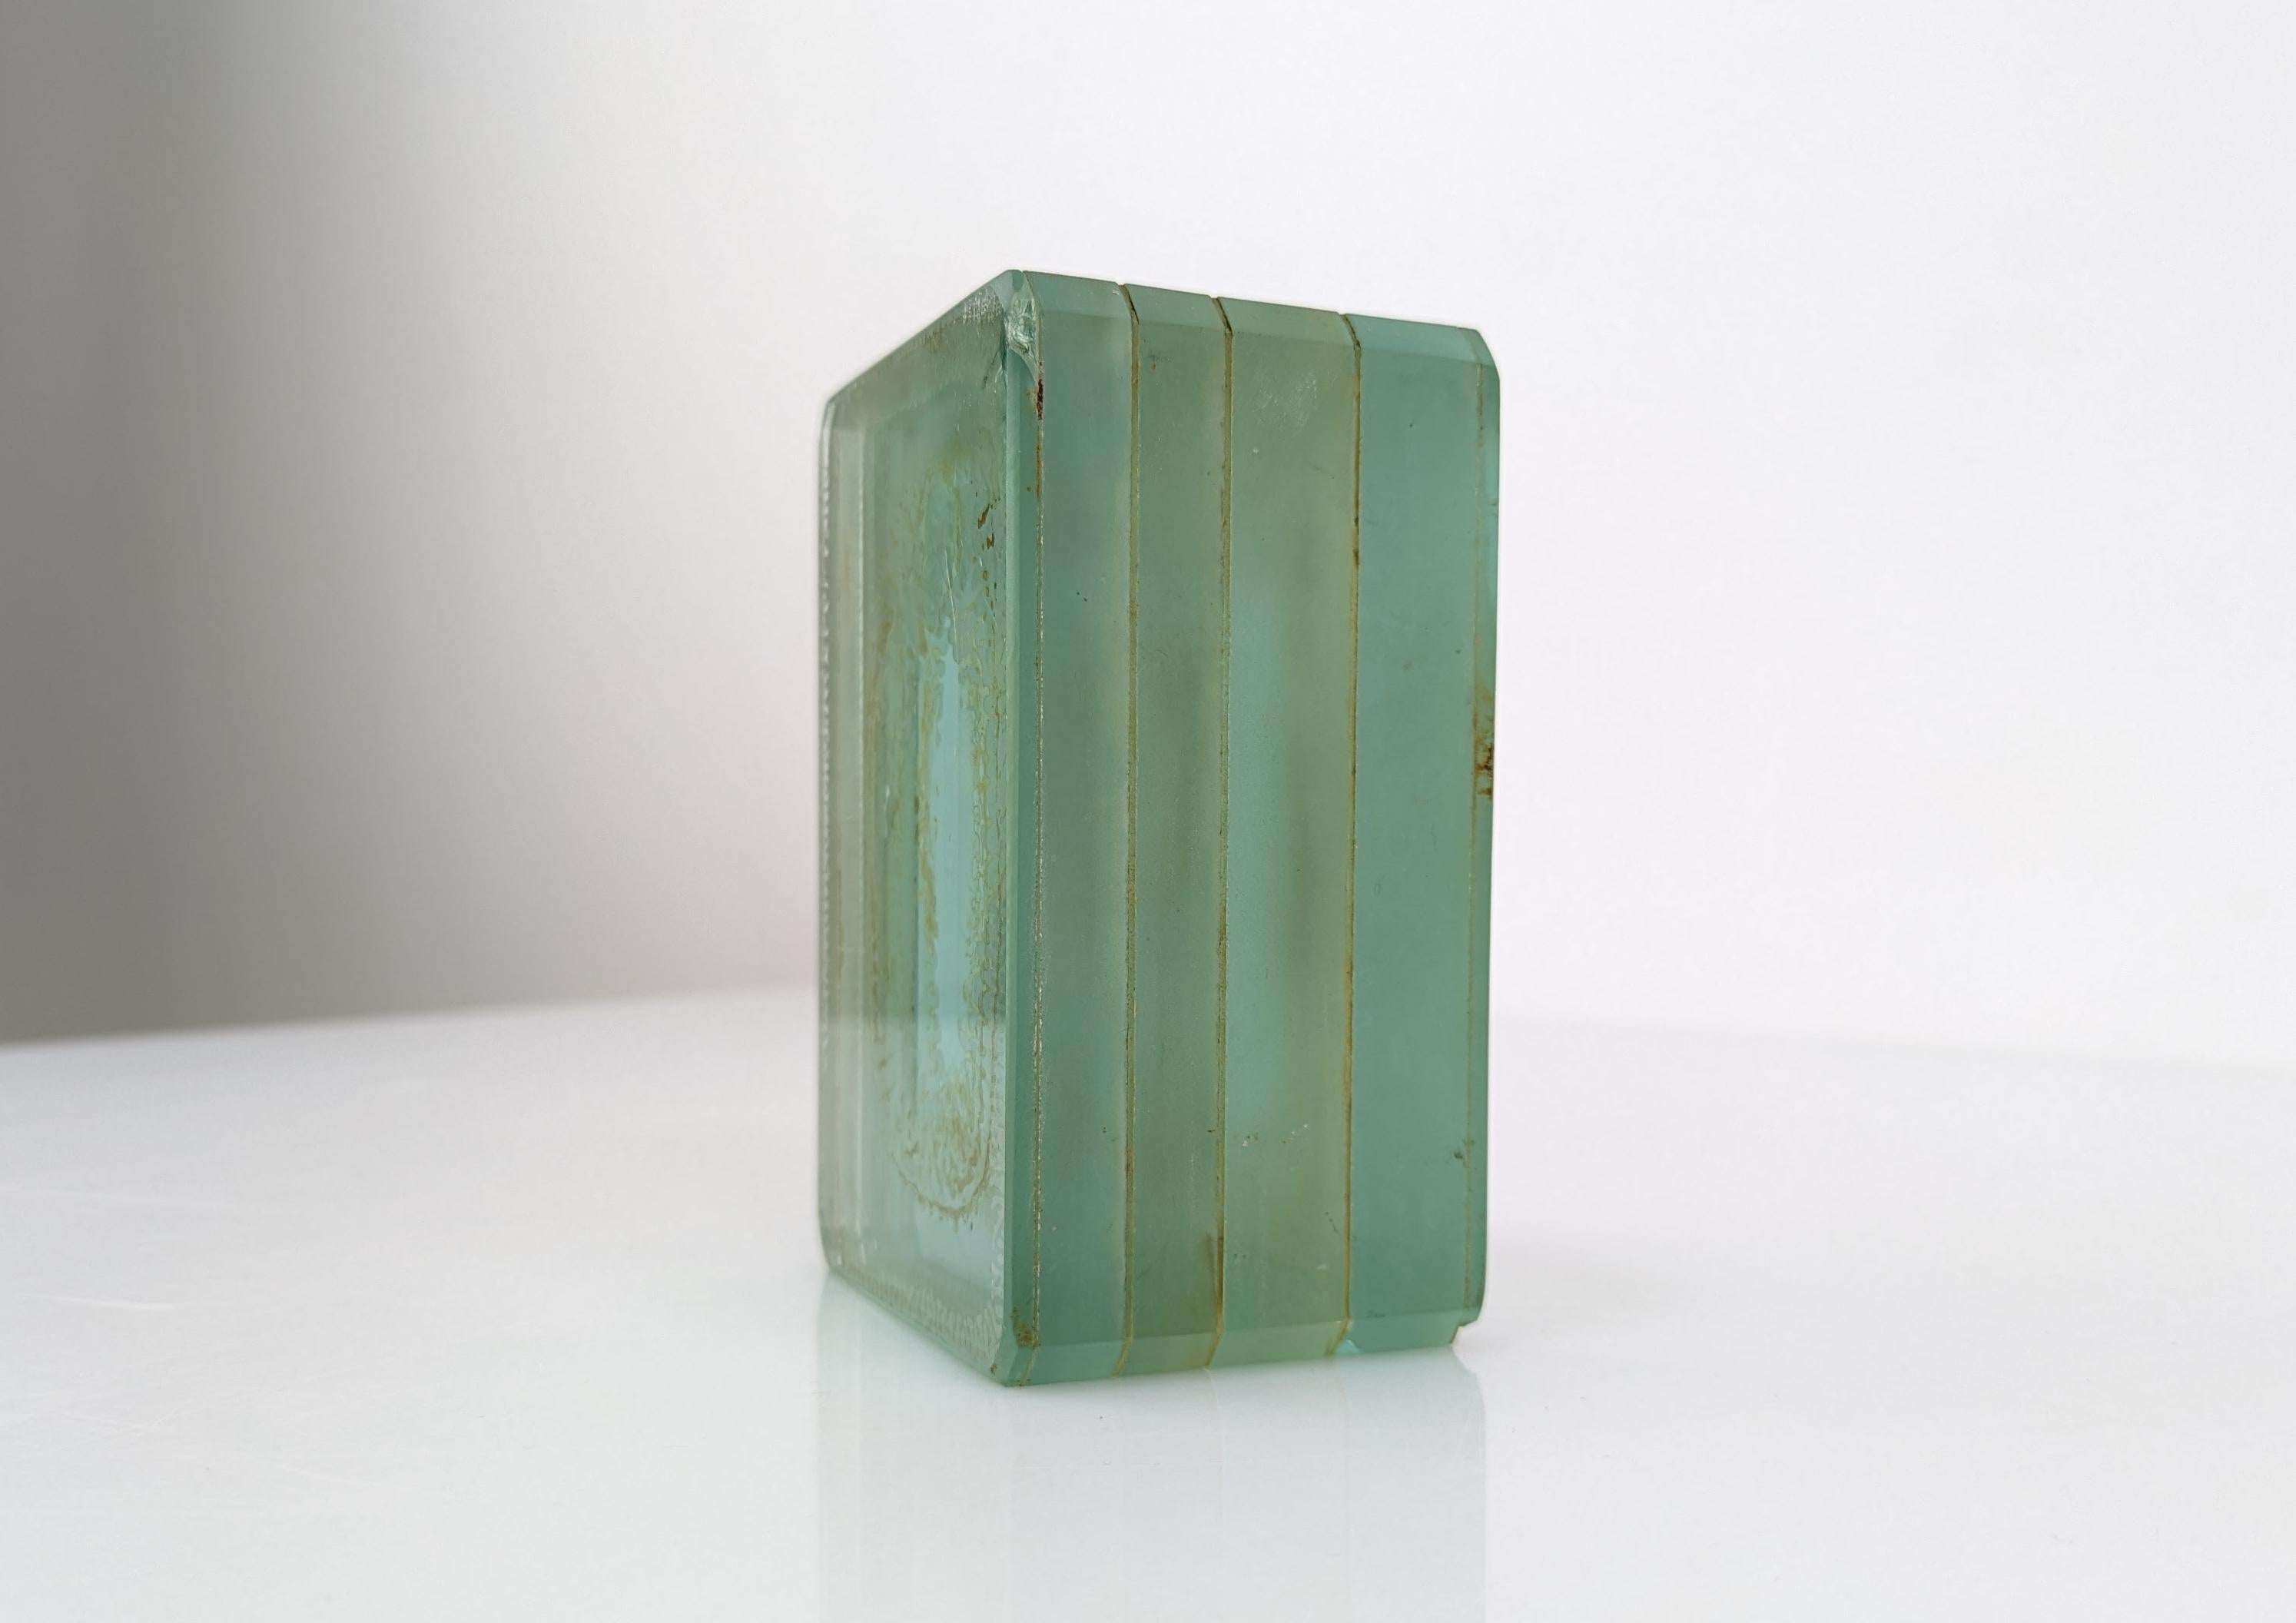 Japanese Glass Sculpture by Makoto Ito For Sale